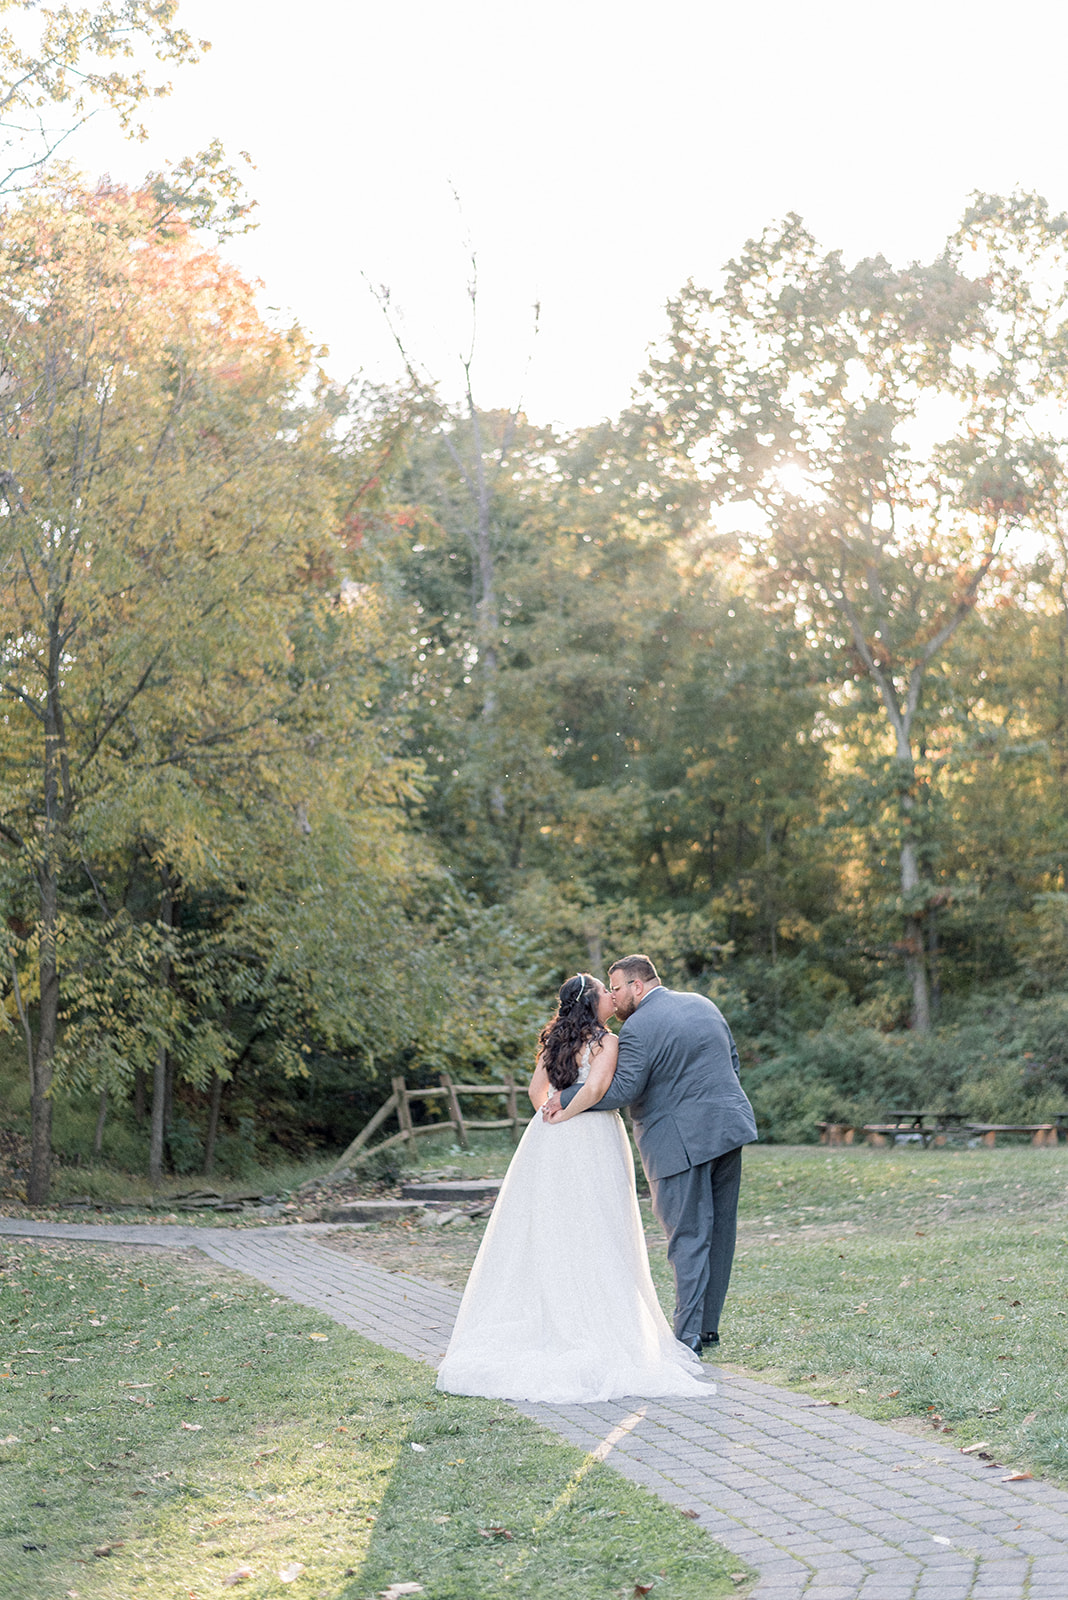 Pennsylvania wedding photographer captures bride and groom kissing while walking together outdoors